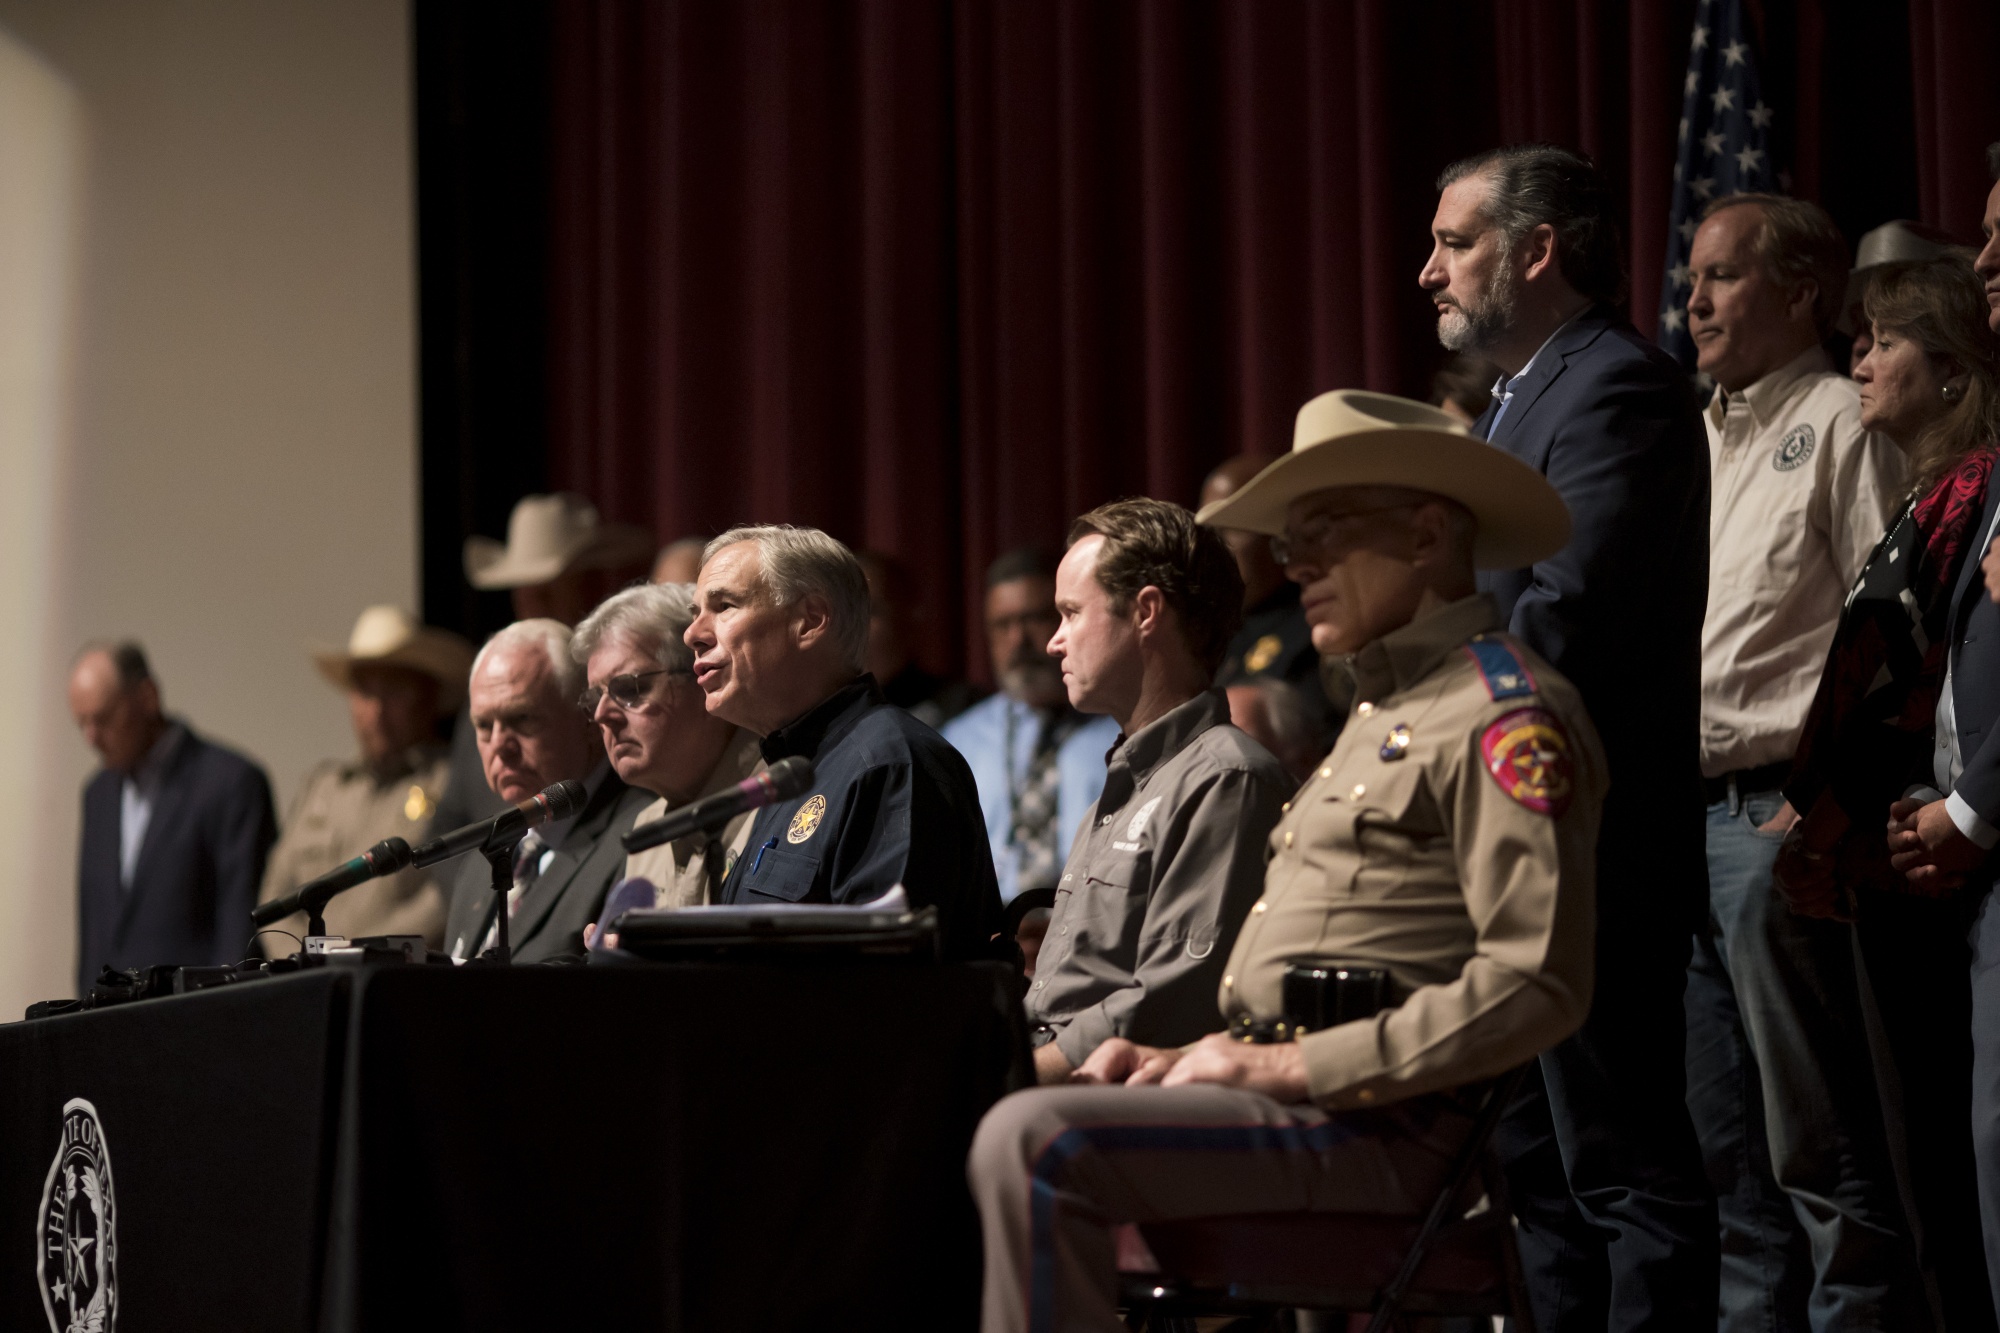 Greg Abbott, Republican governor of Texas, center, at a news conference in Uvalde, Texas, surrounded by Texas police officials on May 25